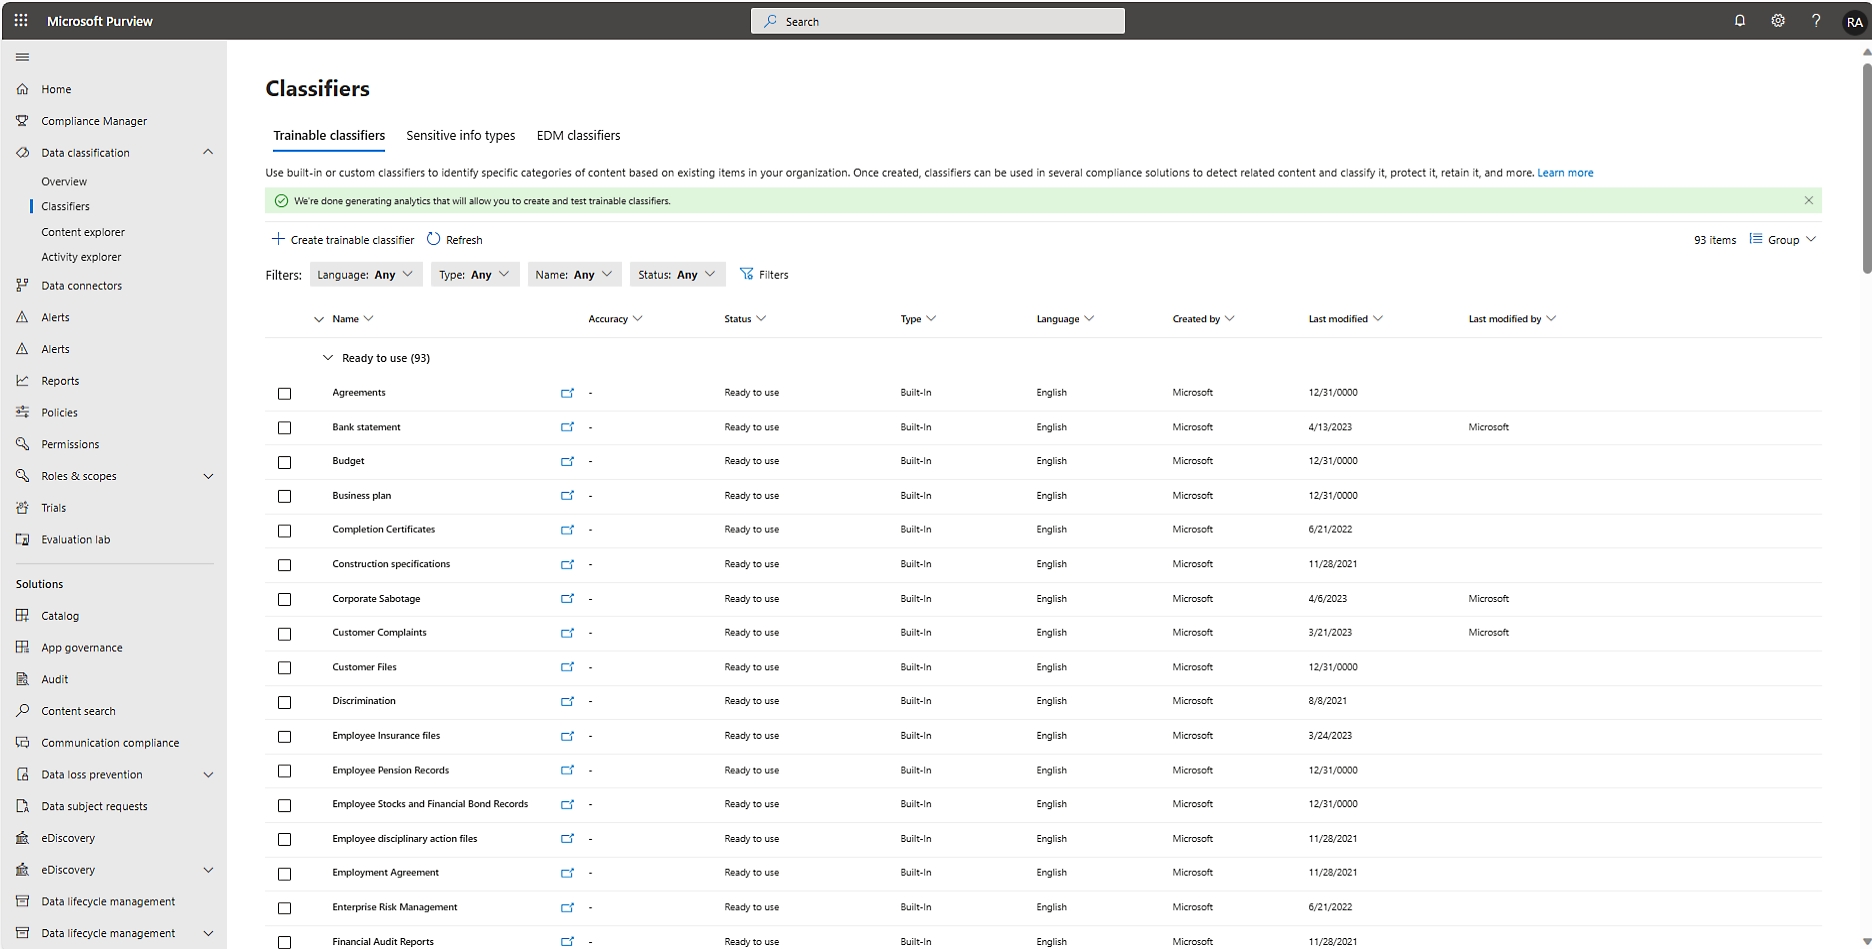 Microsoft azure portal showing a table of classifiers in the language studio, including ids, names, and status details.